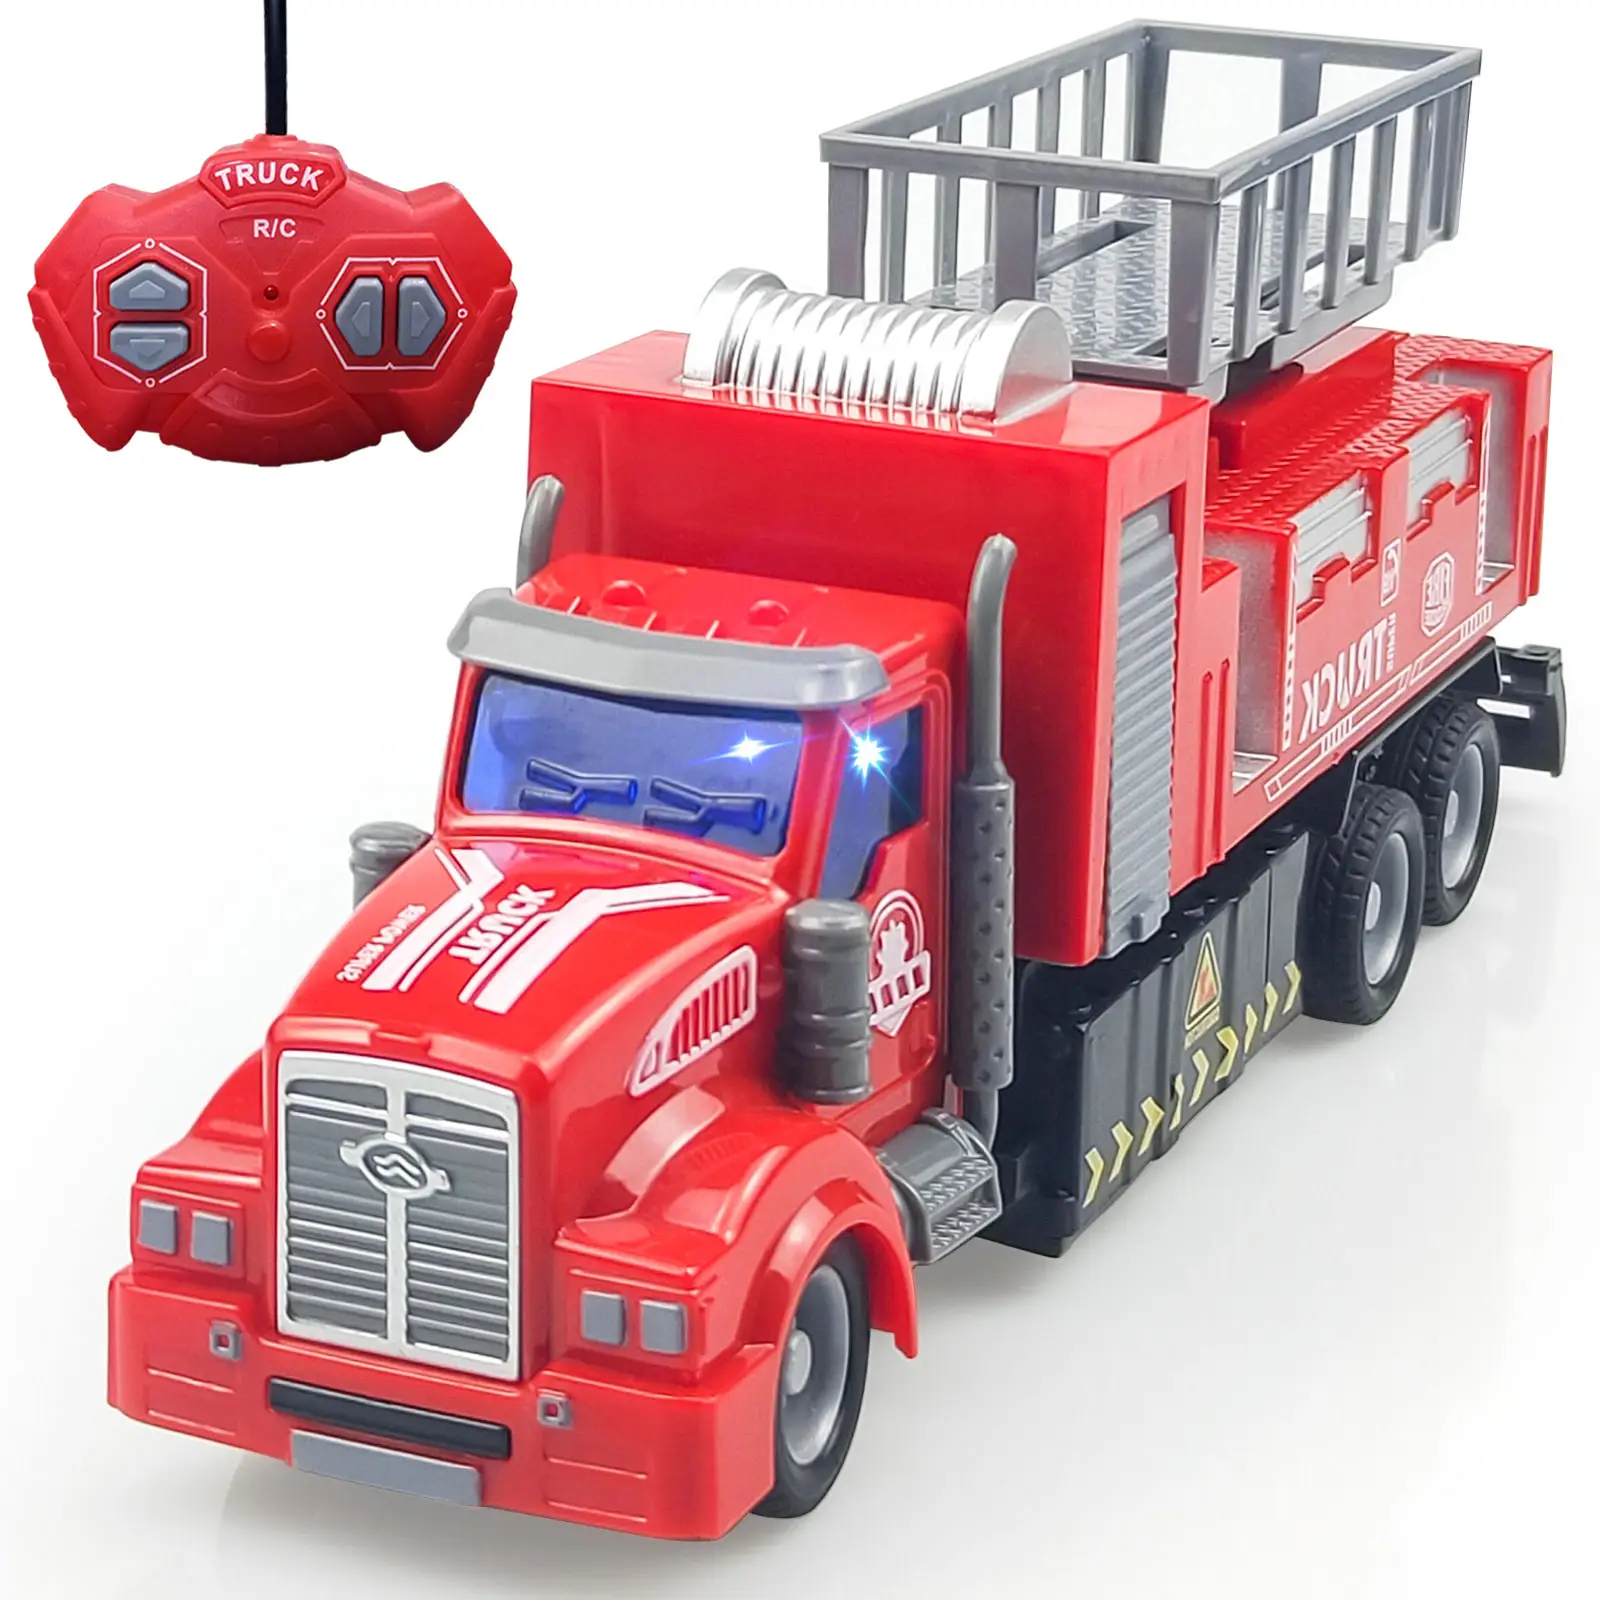 Yongkids Emulation rc car 1:36 RC Lift fire truck with light remote control car rc truck radio control toys